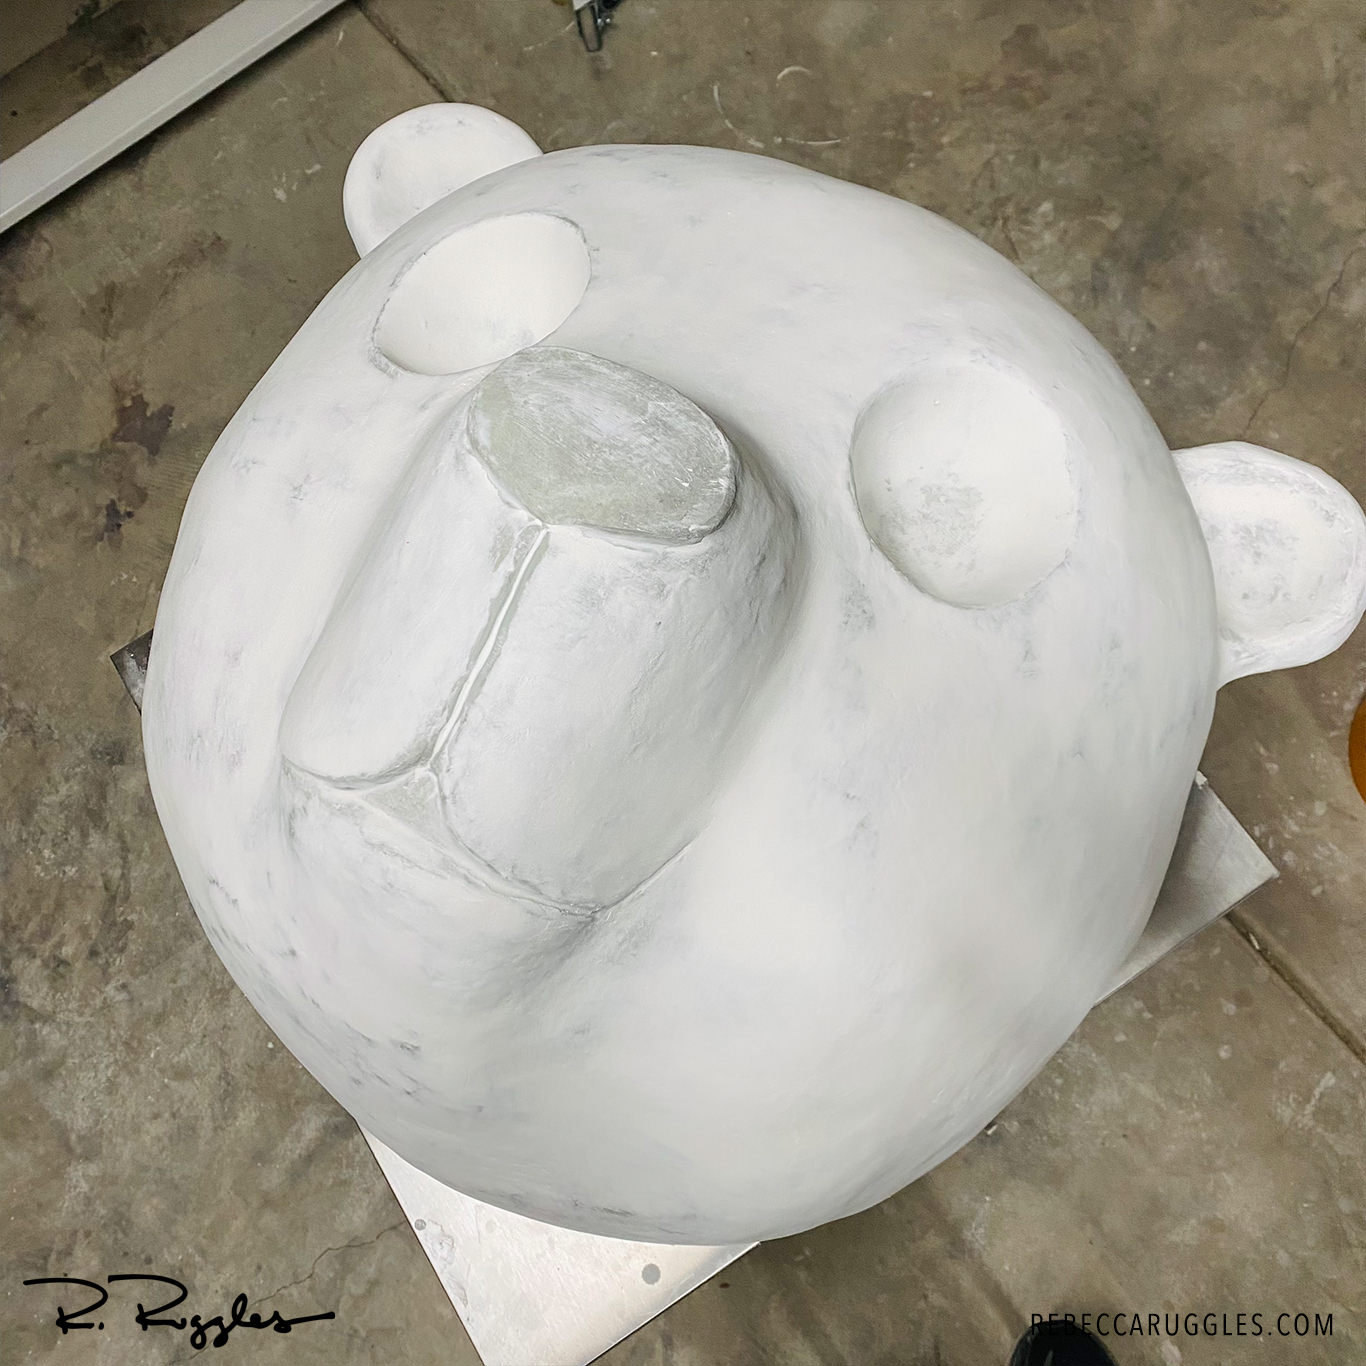 First layer of joint compound on the giant panda sculpture, more layers to go.